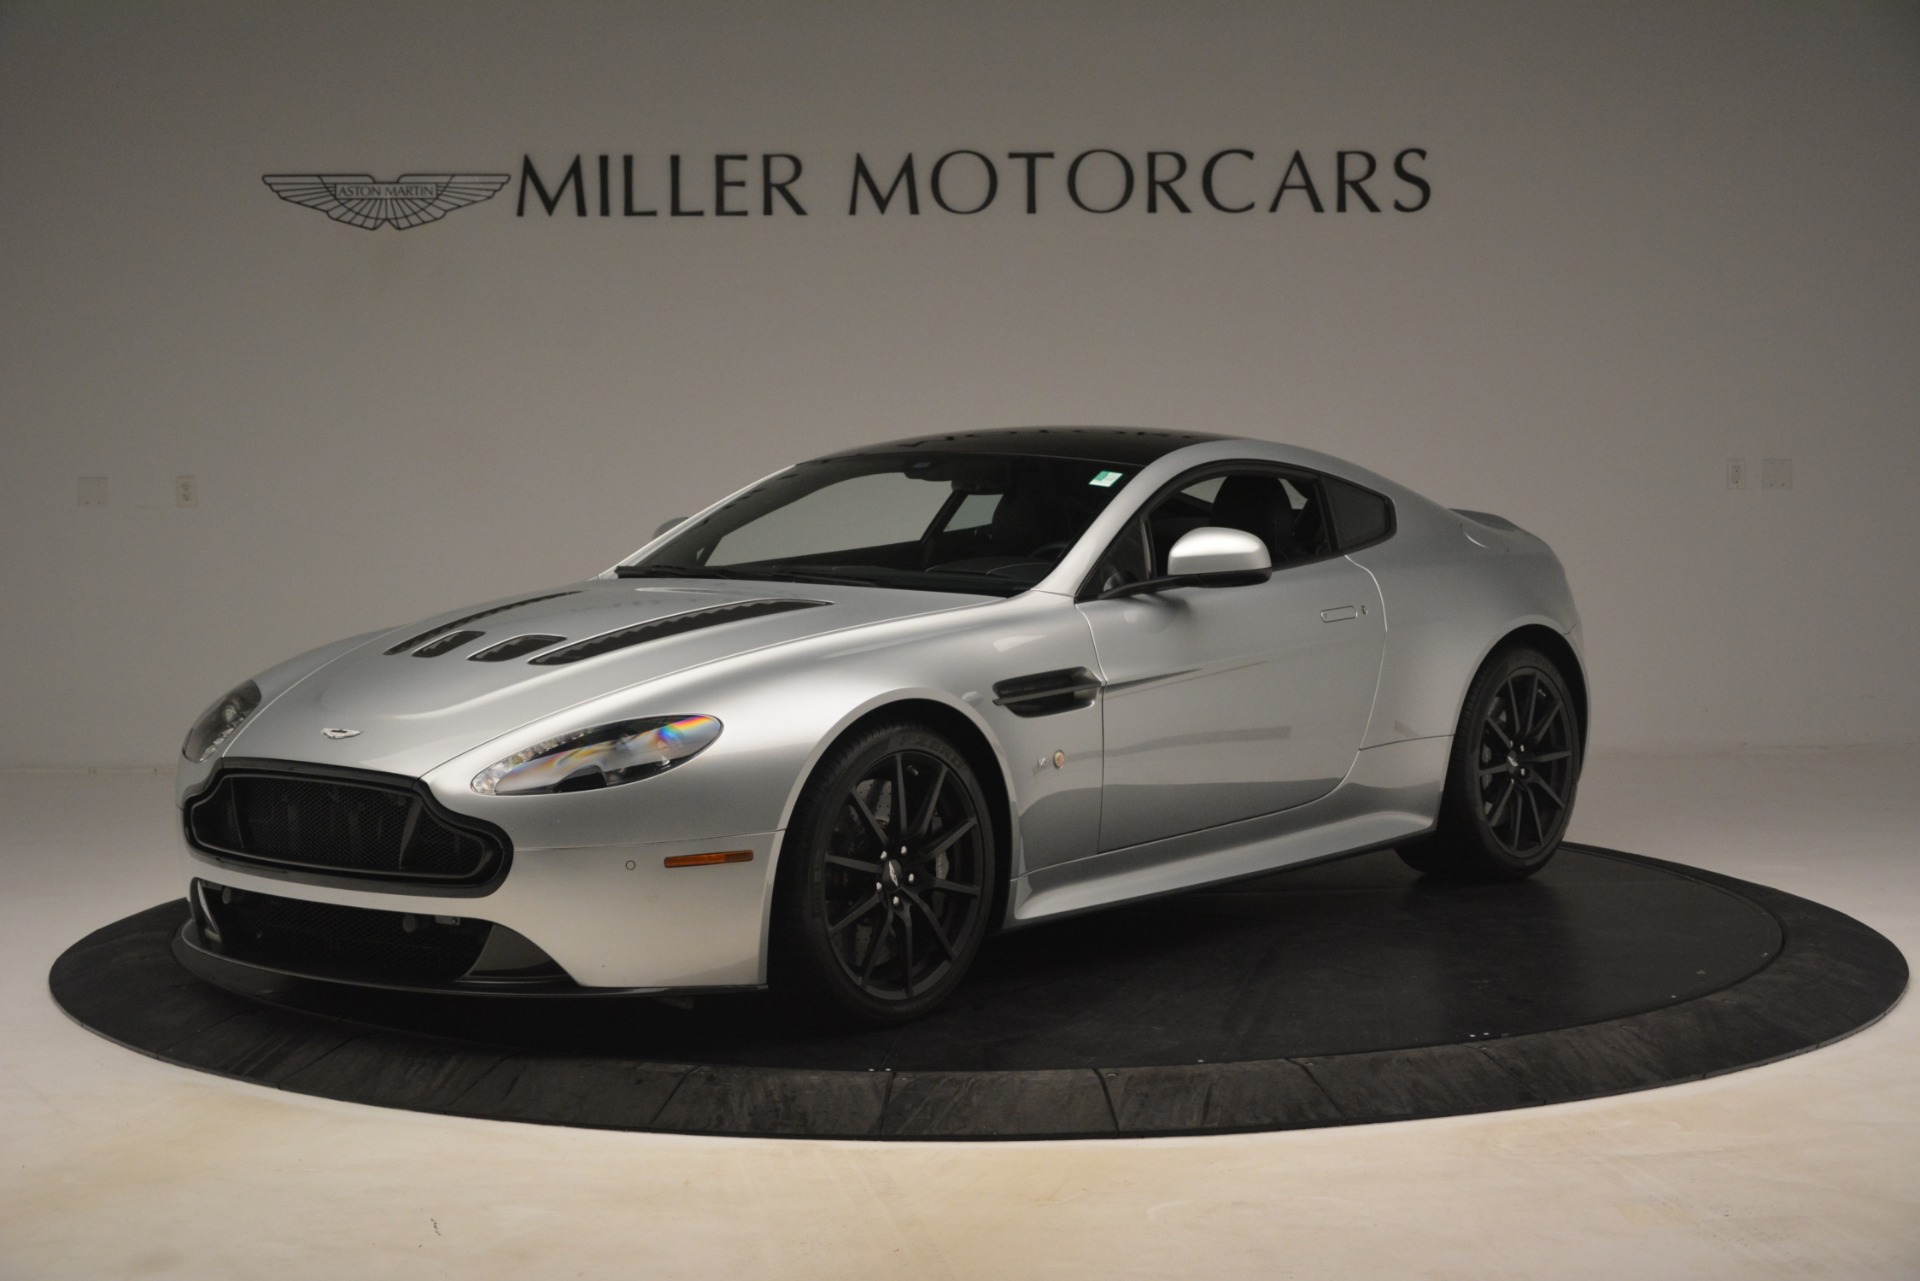 Used 2015 Aston Martin V12 Vantage S Coupe for sale Sold at Aston Martin of Greenwich in Greenwich CT 06830 1